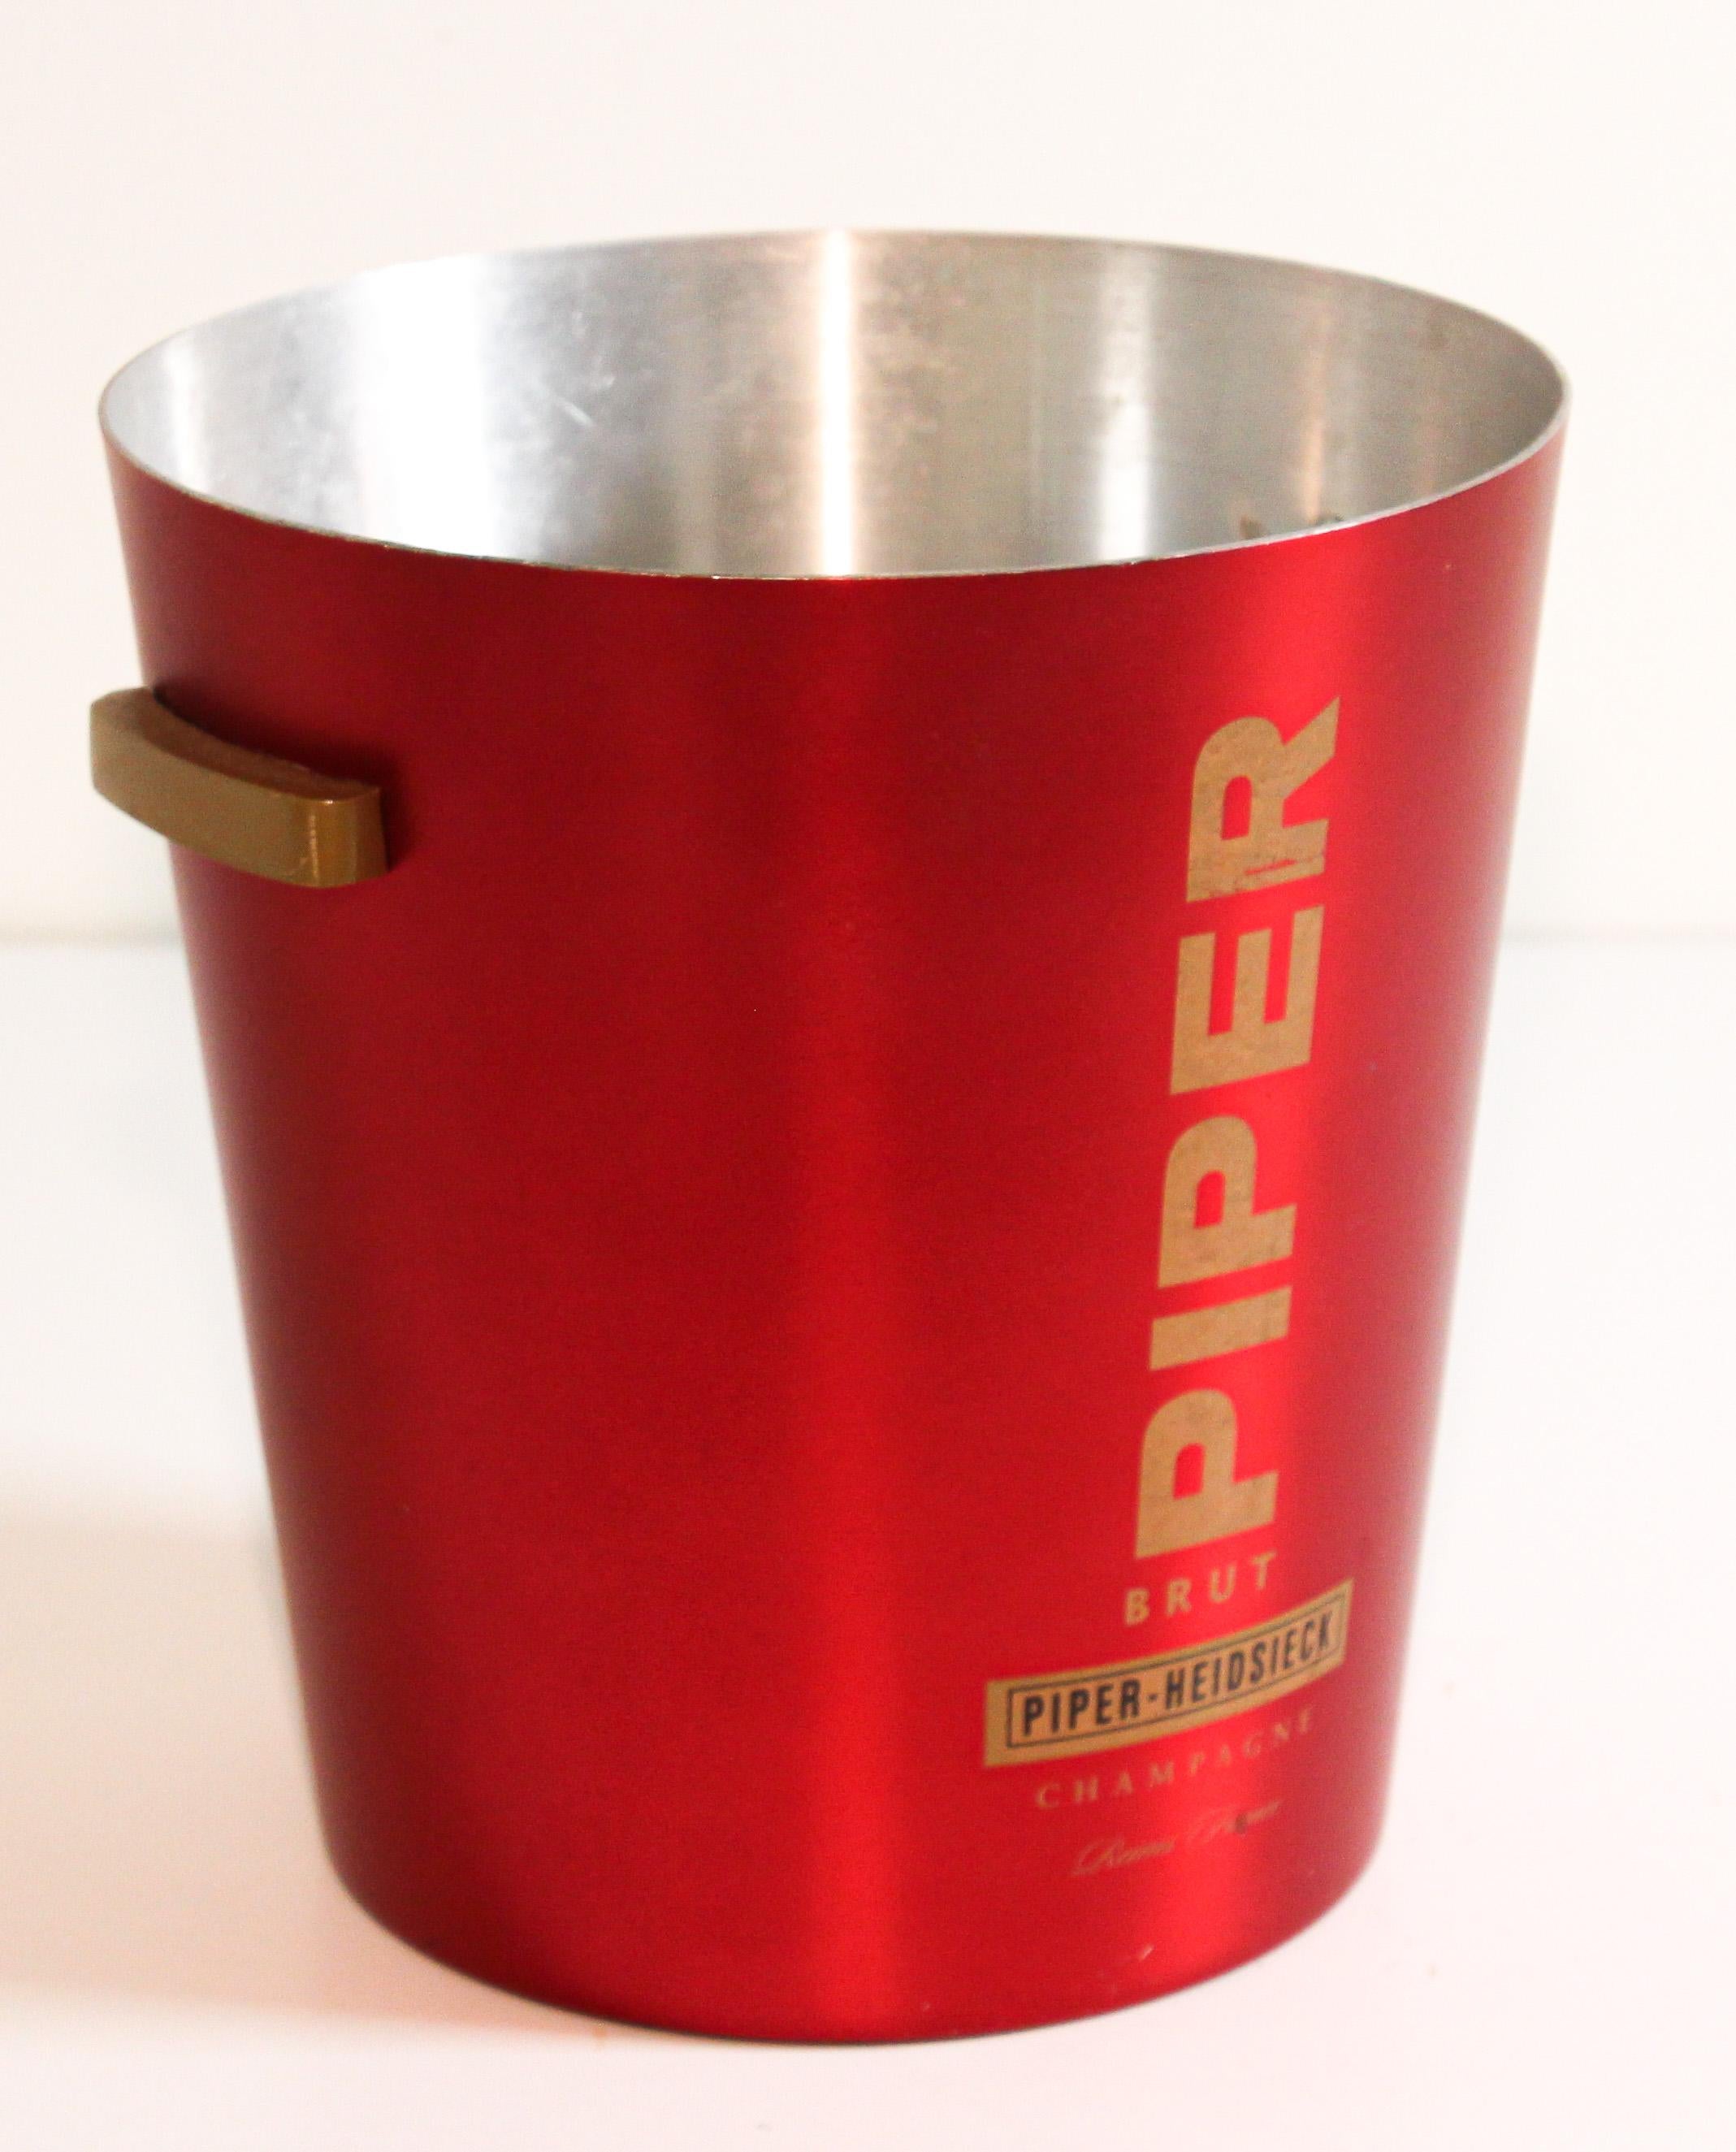 An aluminum 1970s champagne red ice bucket manufactured in France for the Piper-Heidsieck champagne house founded by Florens-Louis Heidsieck in 1785.
Champagne bucket cooler. Great color combination in red and aluminum, hard to find.
There is a